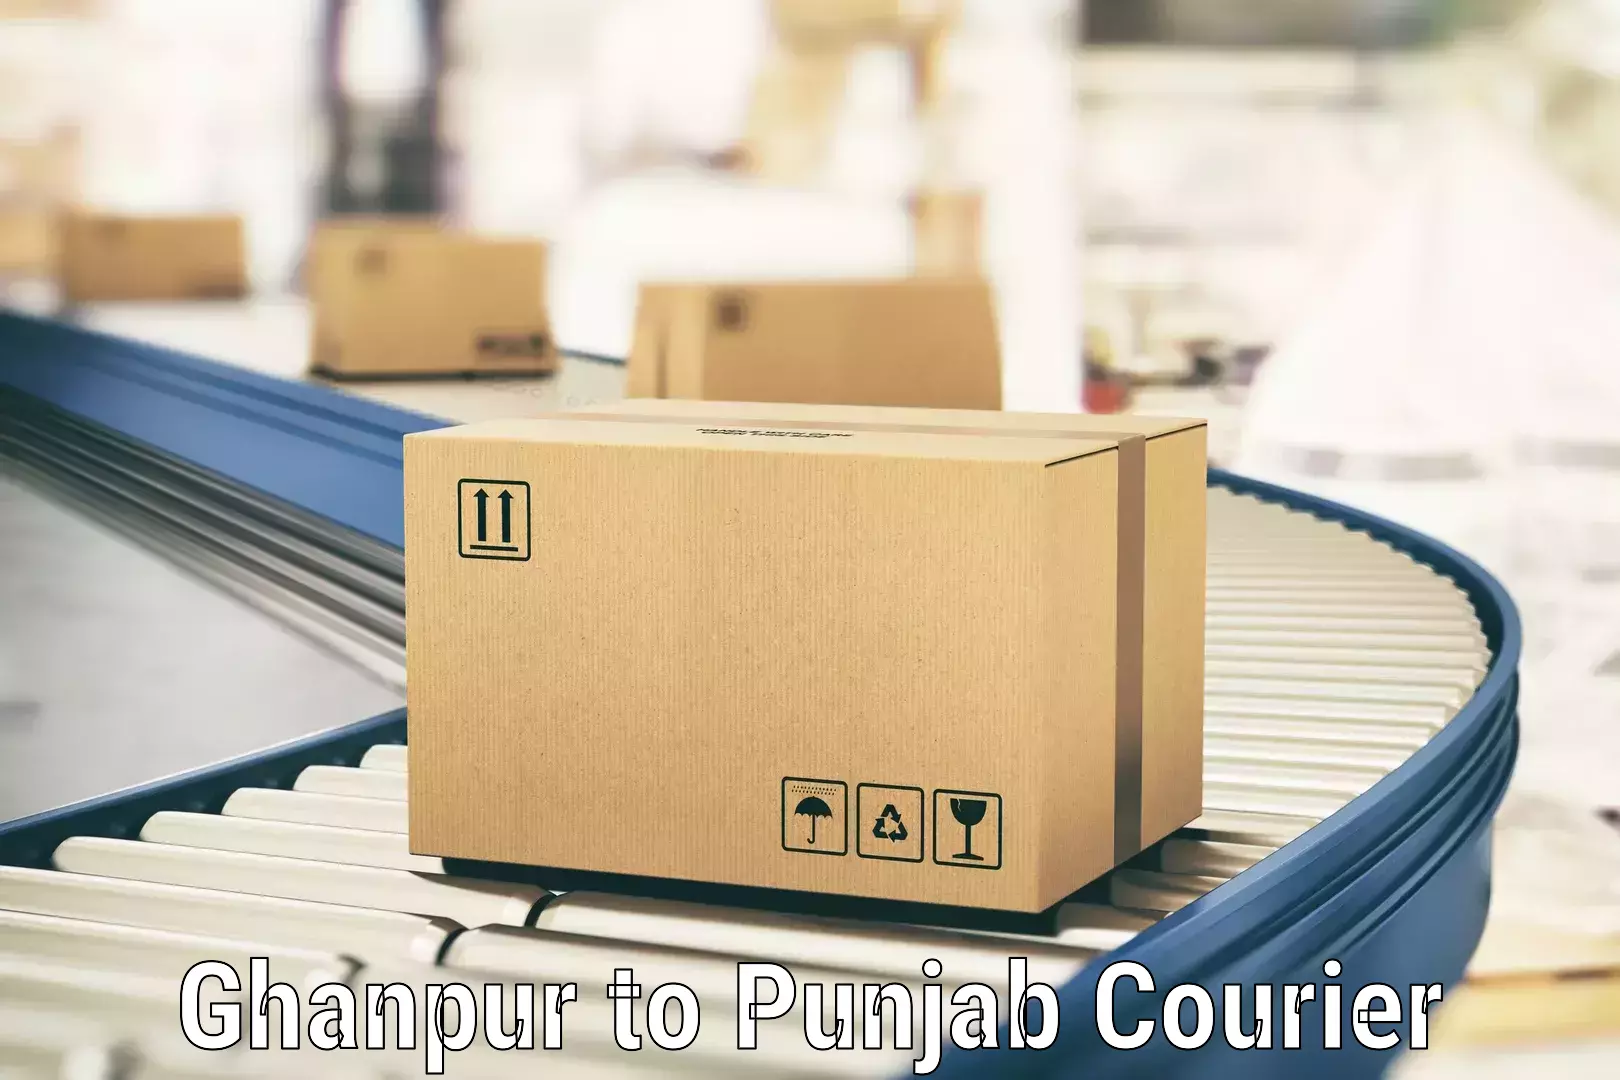 Global parcel delivery Ghanpur to Punjab